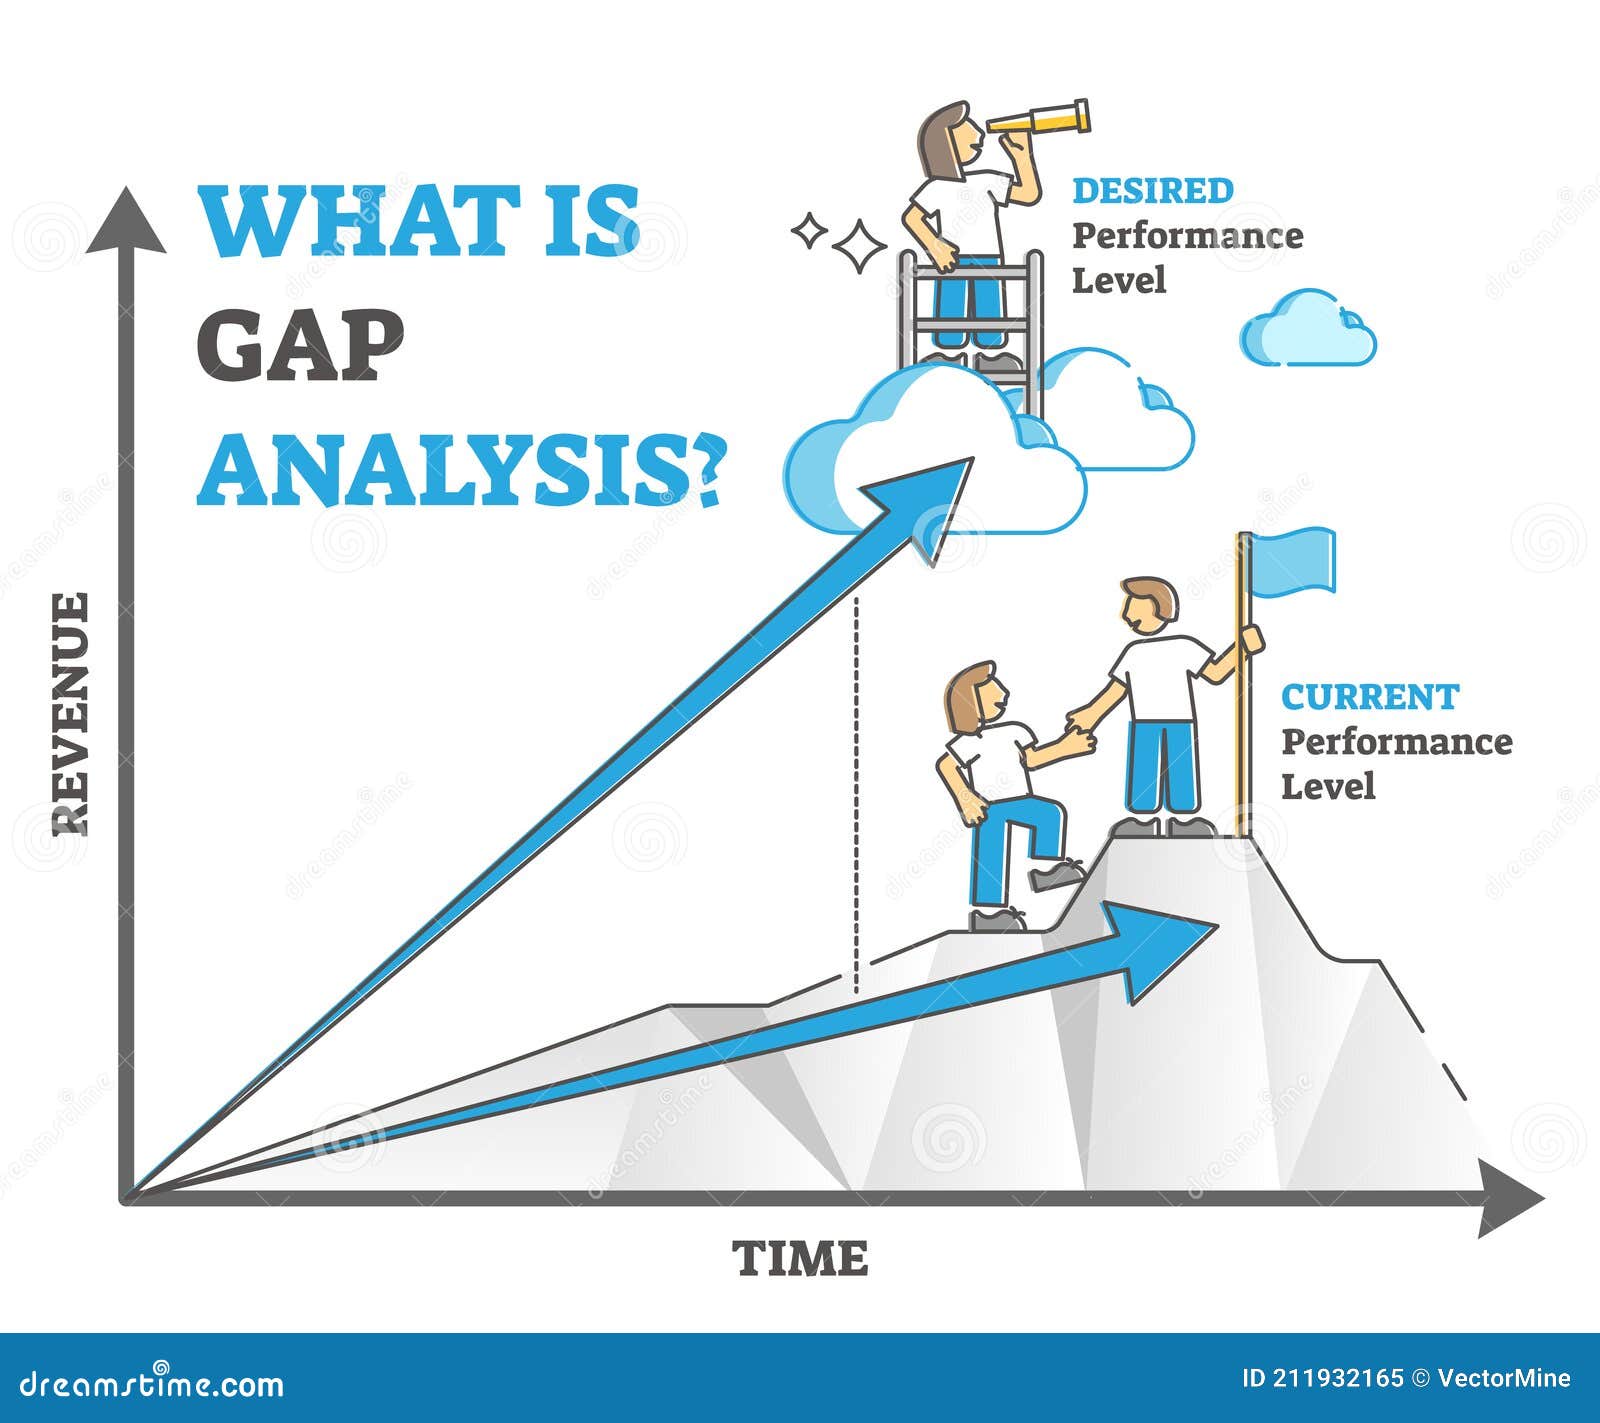 gap analysis as current and desired performance level outline diagram concept